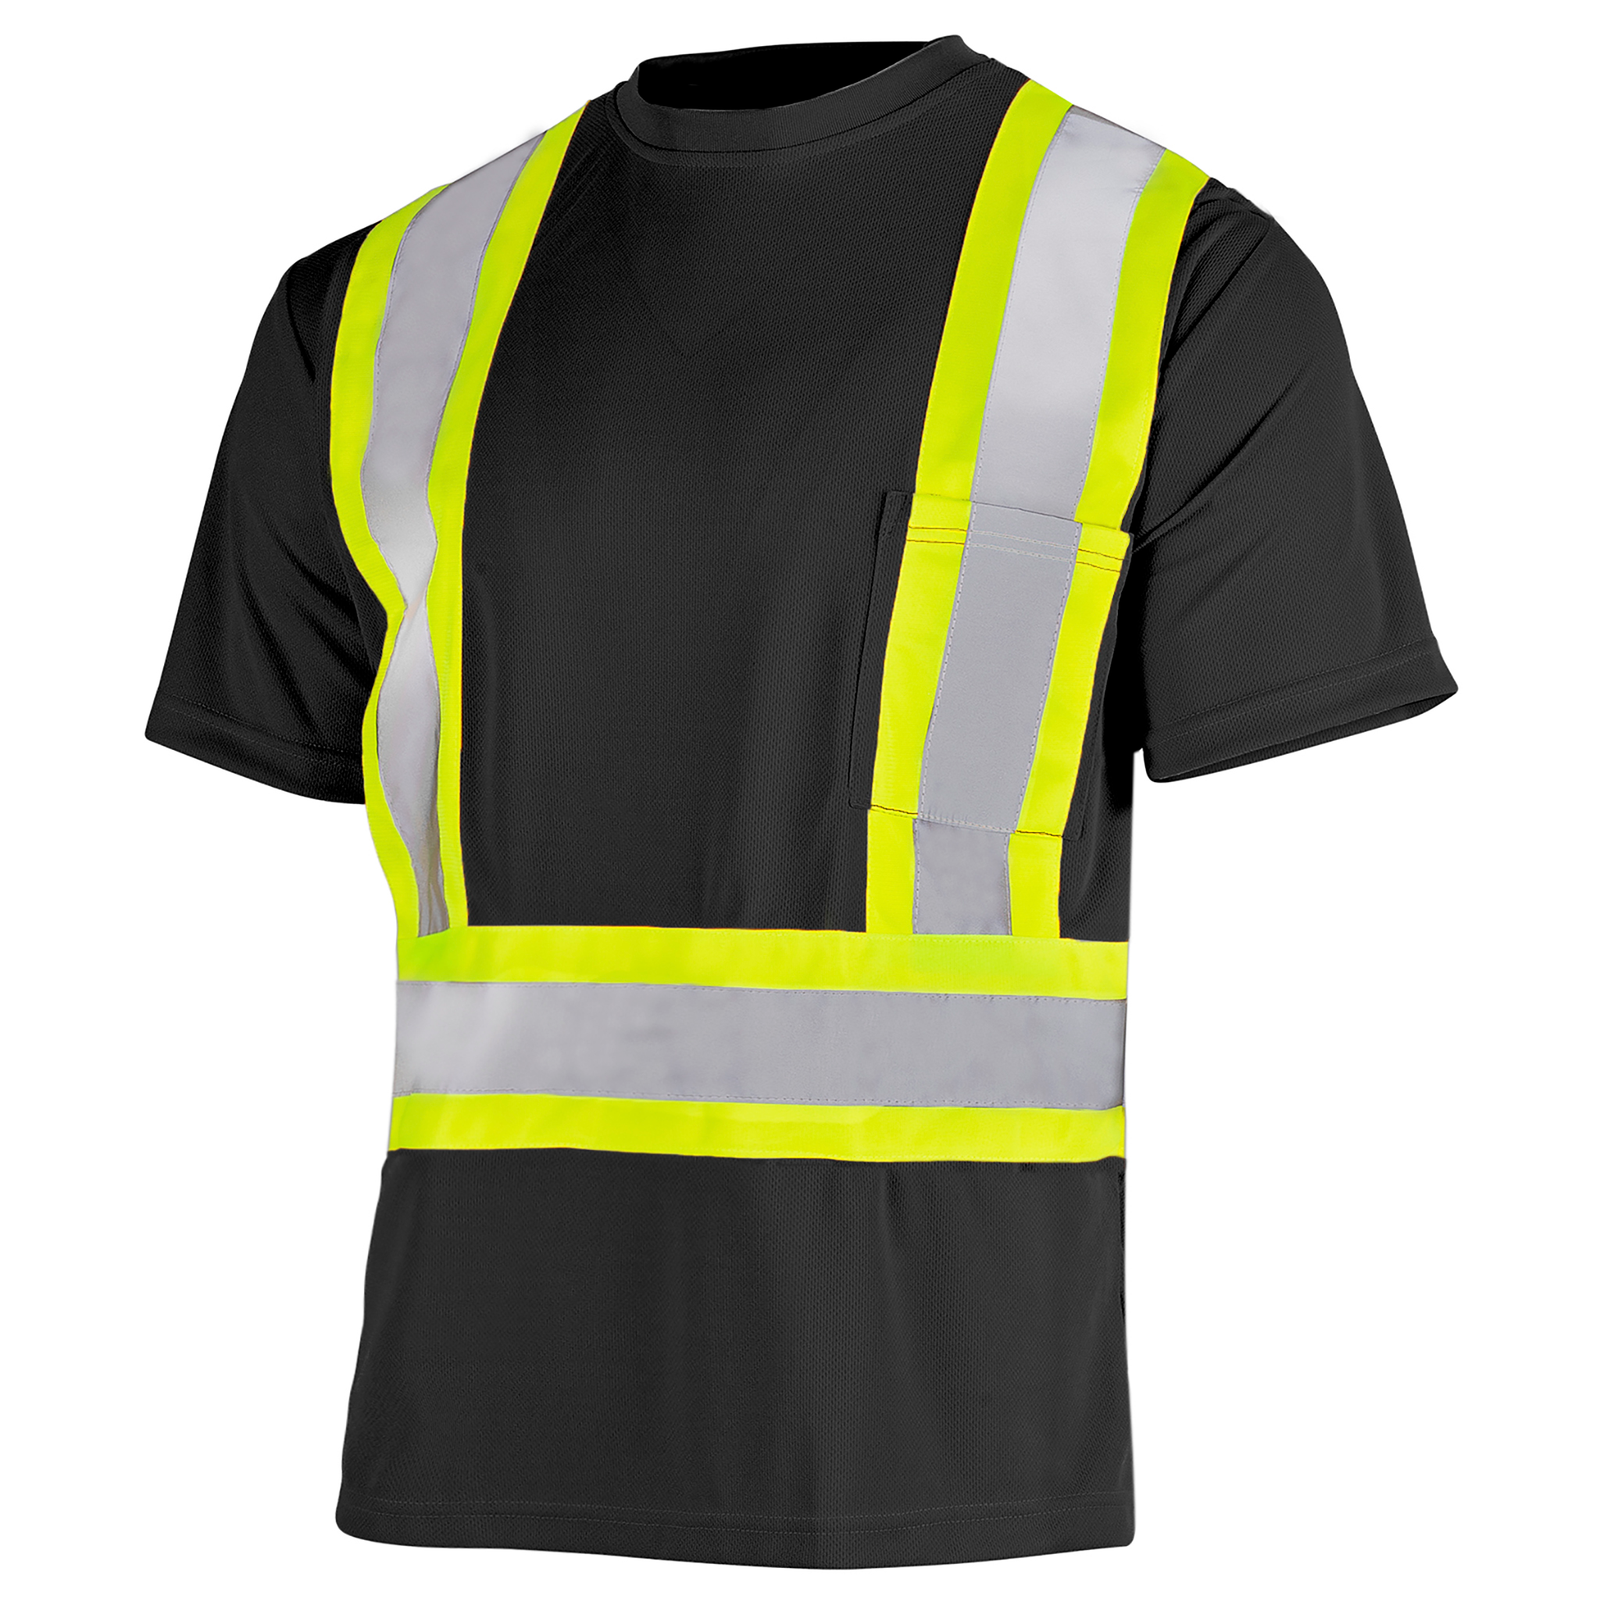 Diagonal view of the Hi-vis reflective two tone short sleeve black safety shirt